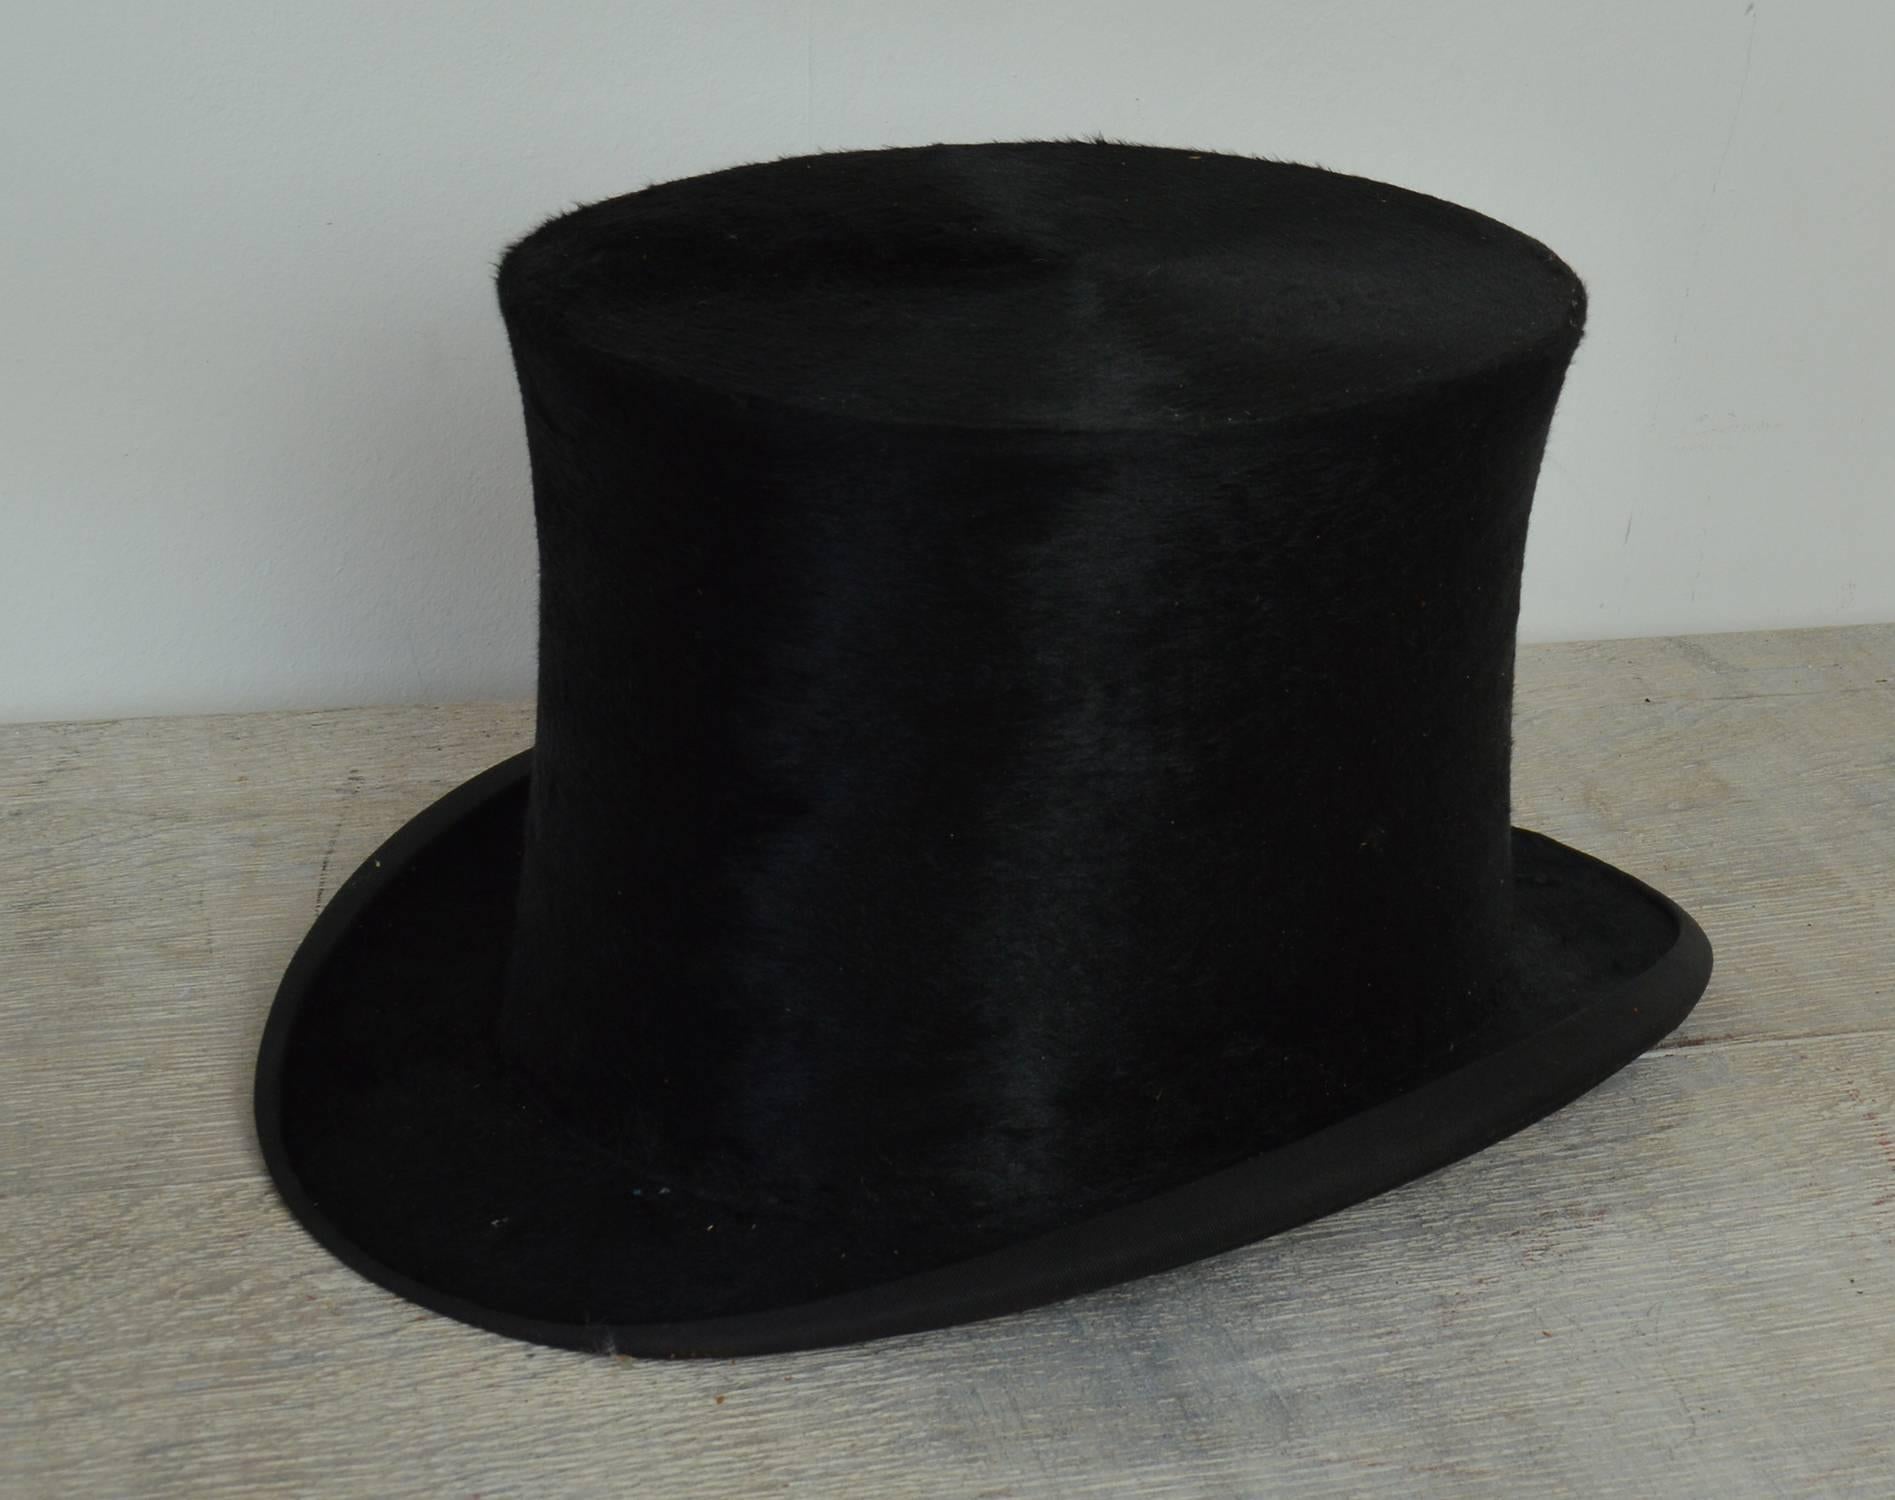 A very fine plush silk top hat in excellent wearable condition.

The interior is made of cream satin and fine cream leather with a printed armorial makers mark at the top.

Their is no evidence of the size on the hat but I have calculated it to